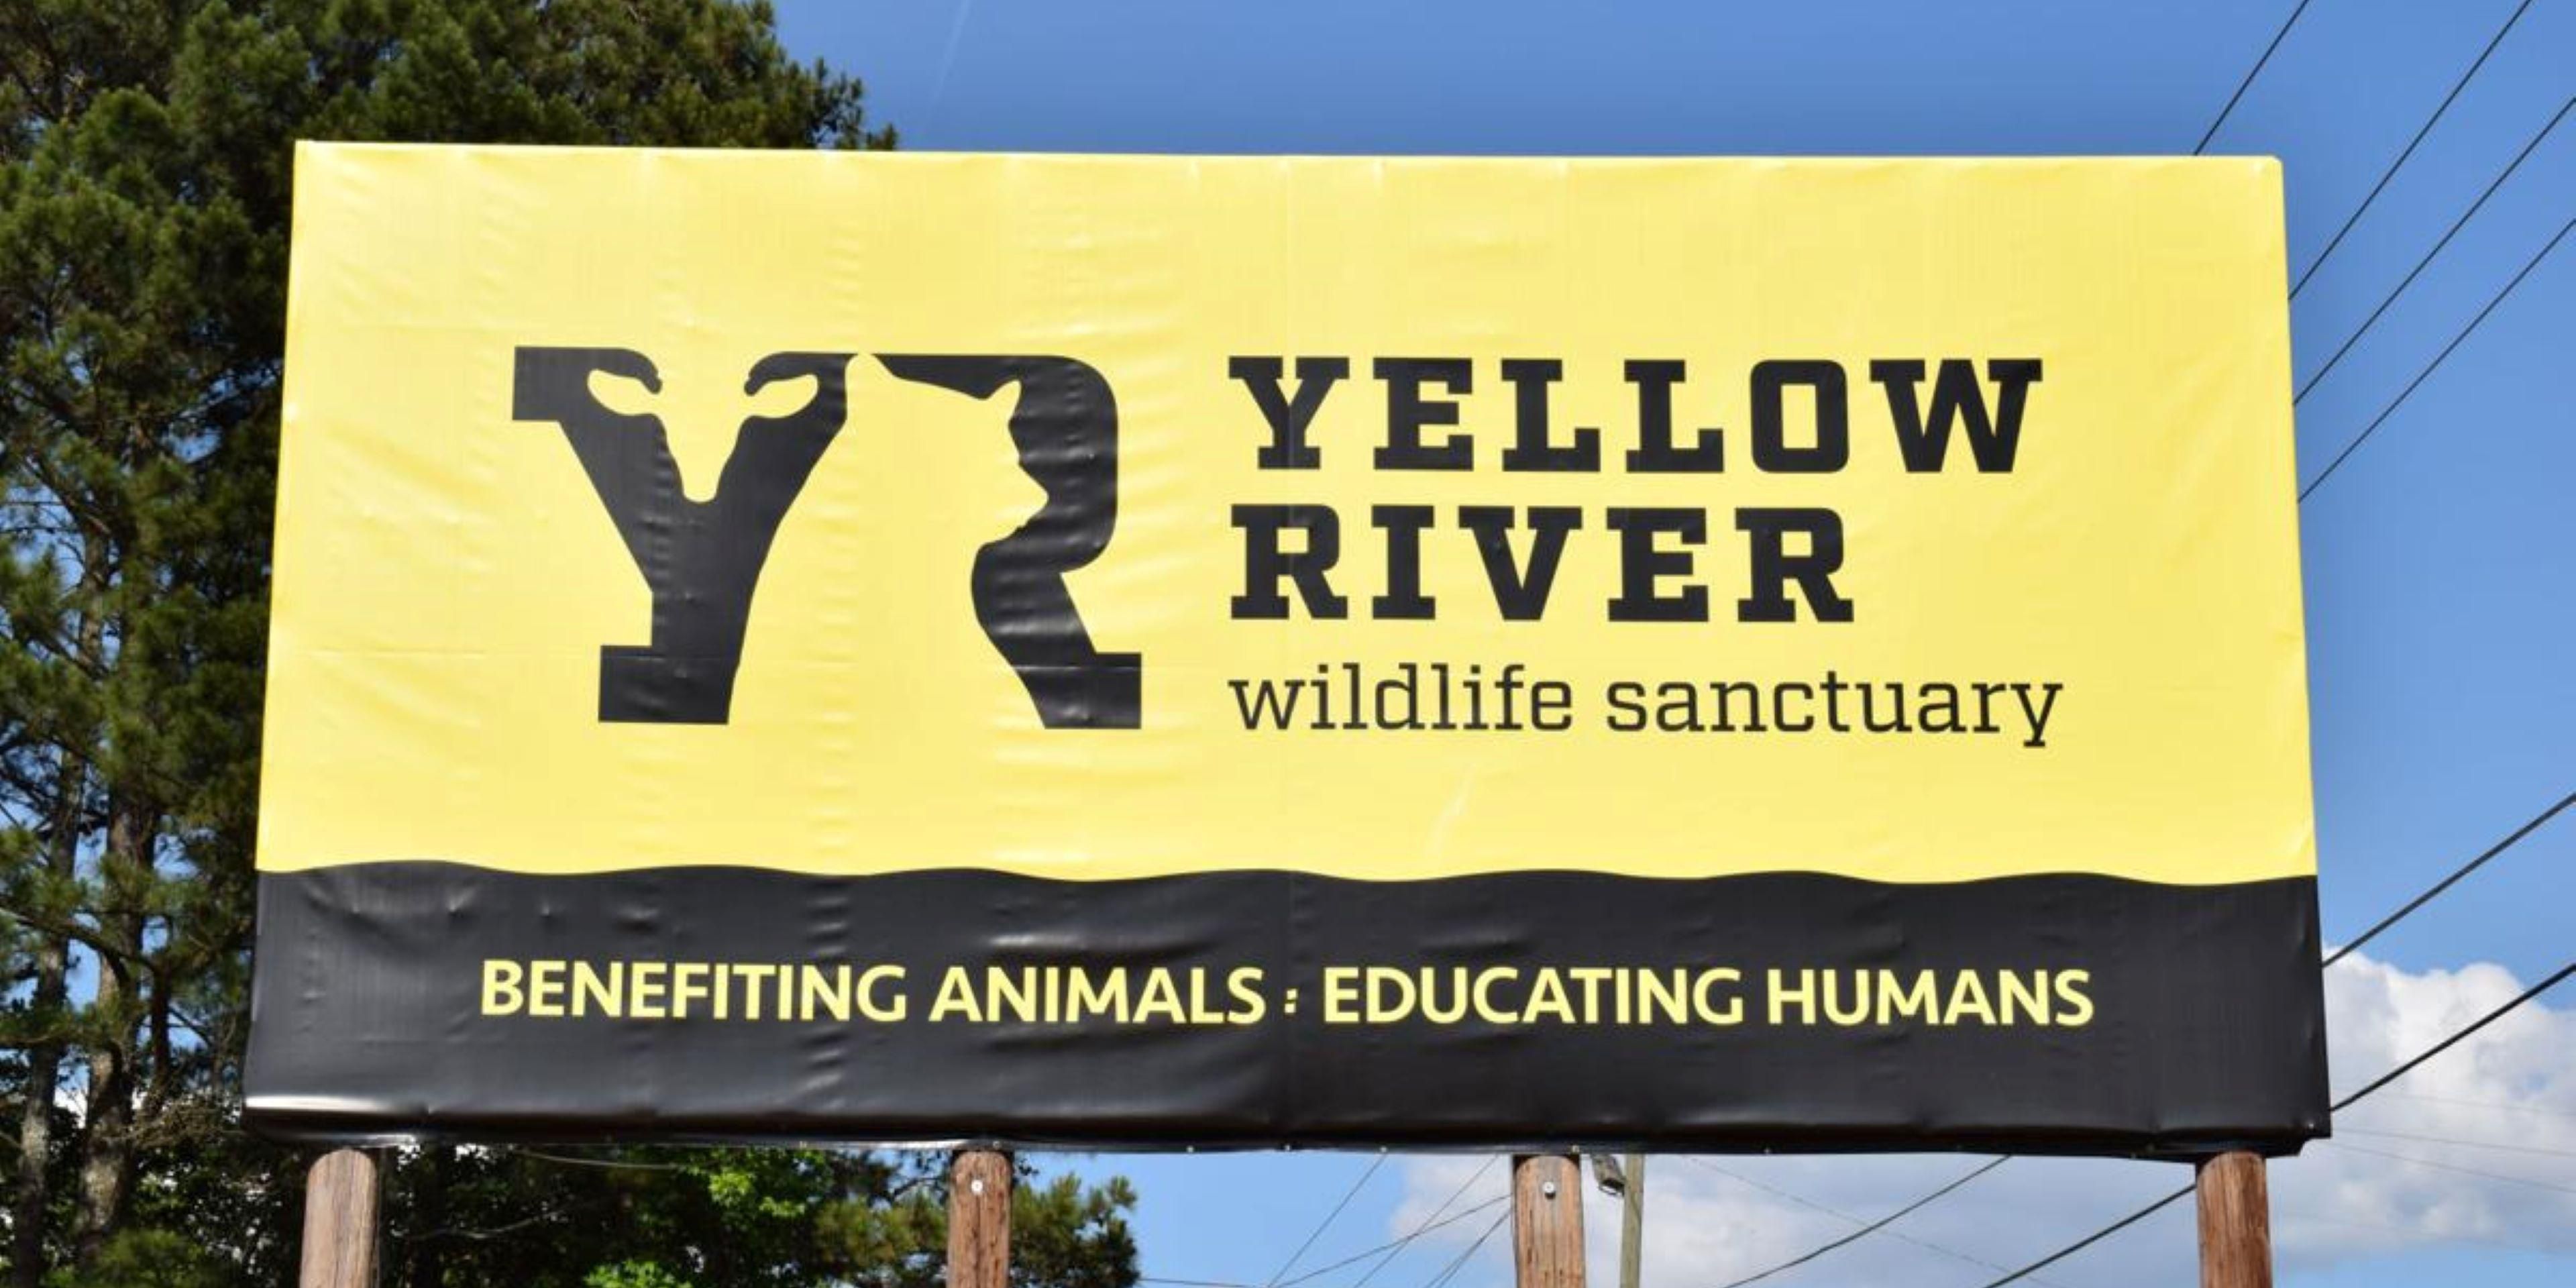 If you’re looking for a fun and interesting way to spend a morning, or the afternoon, look no further! The Yellow River Wildlife Sanctuary has undergone extensive renovations to provide the animals here with the best possible environment, care and quality of life. Come visit alongside the Yellow River, just minutes from Stone Mountain Park